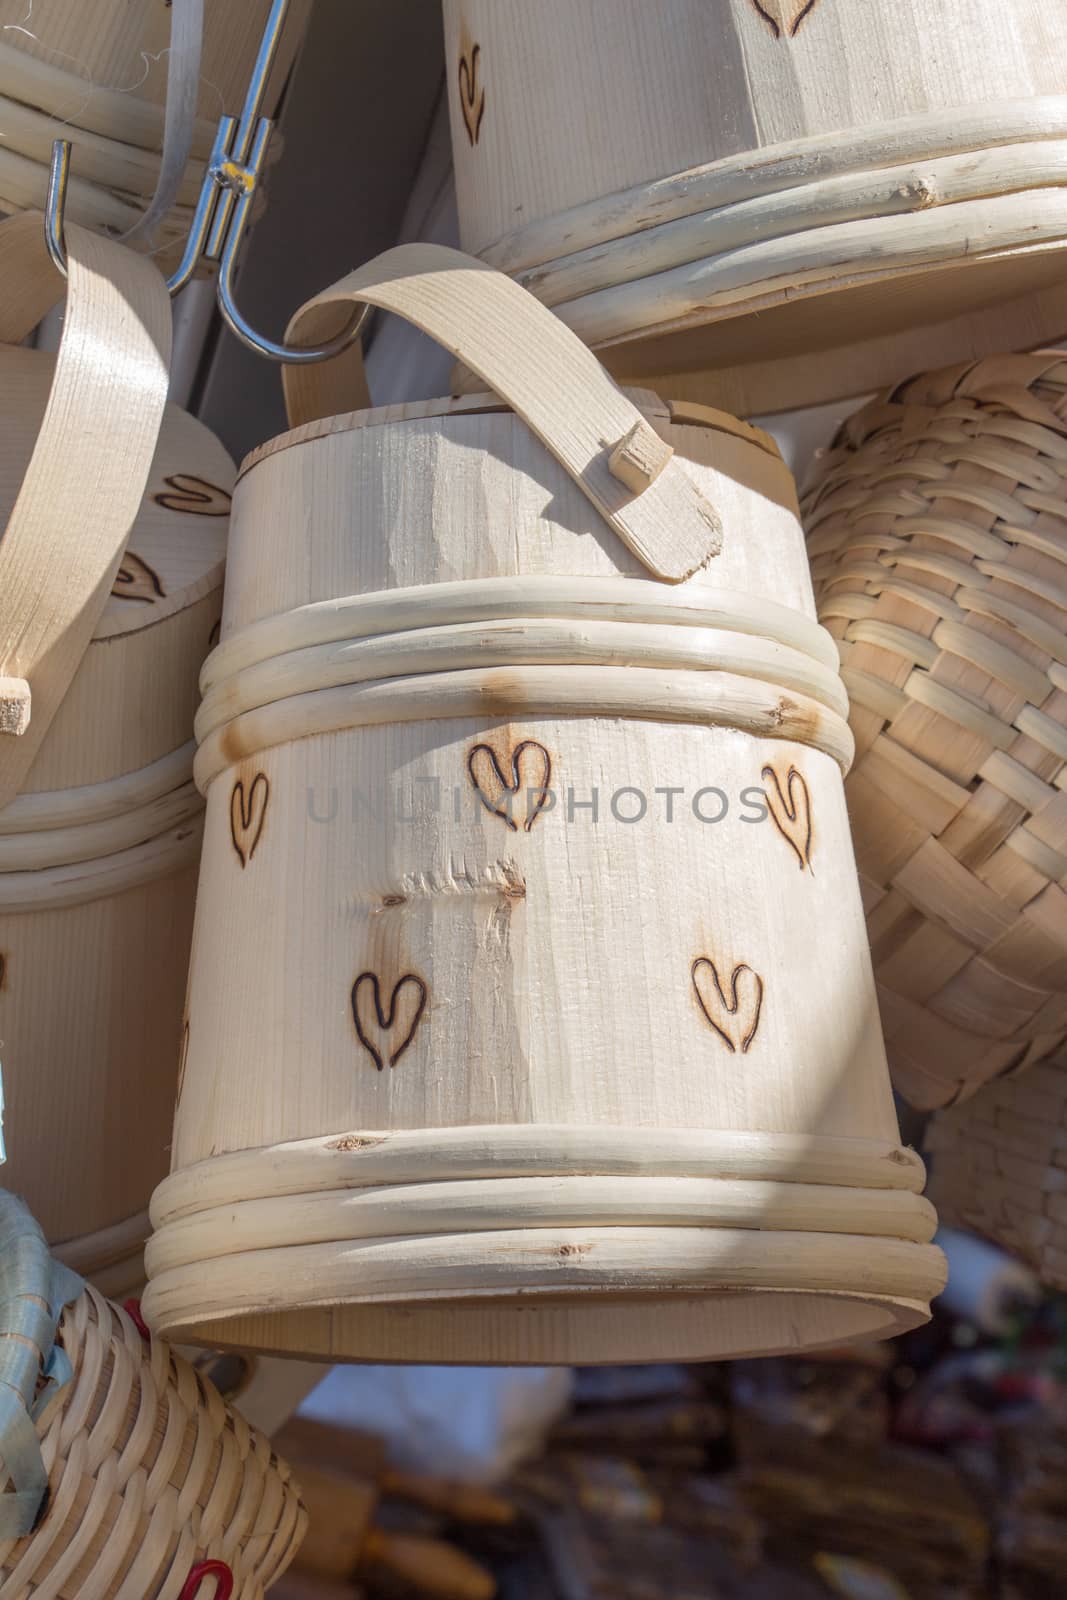 Empty wooden baskets for sale in a market place